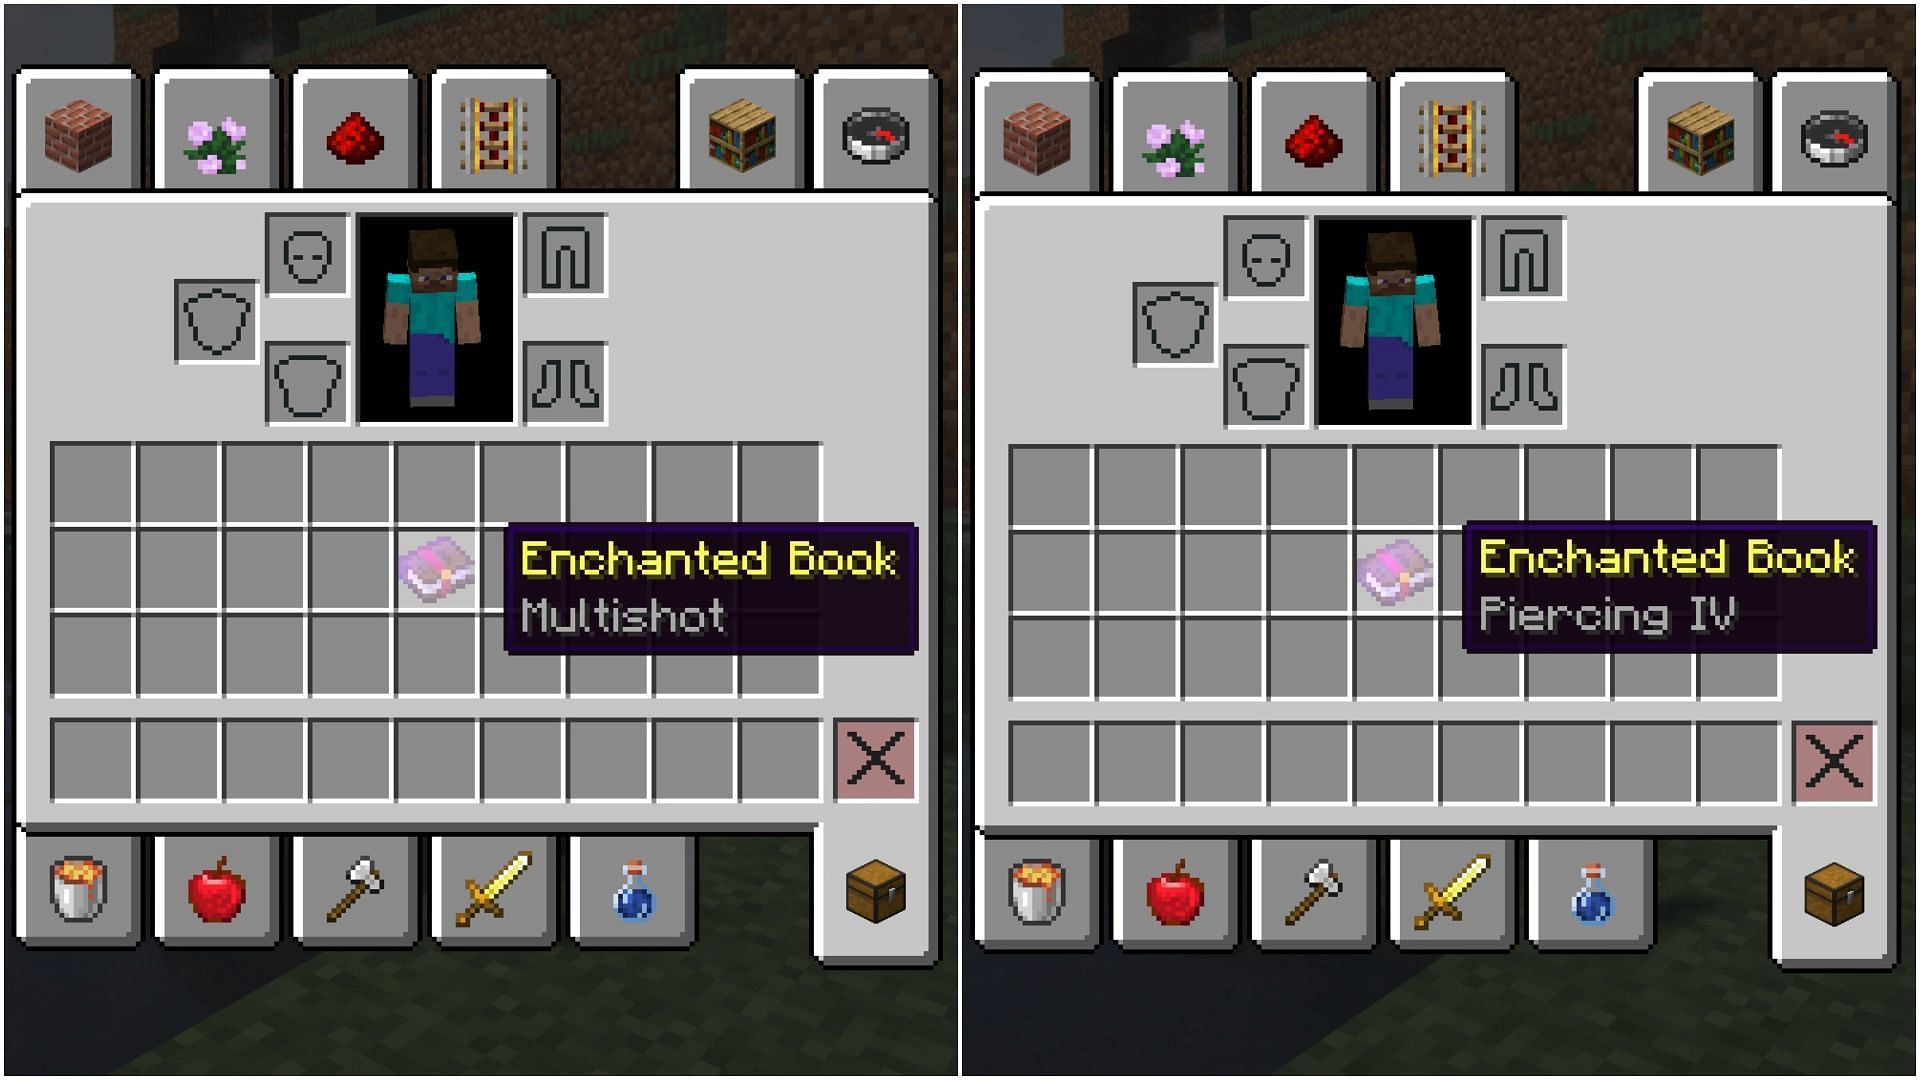 Multishot Vs Piercing Enchantment In Minecraft Which One Is Better For Your Crossbow